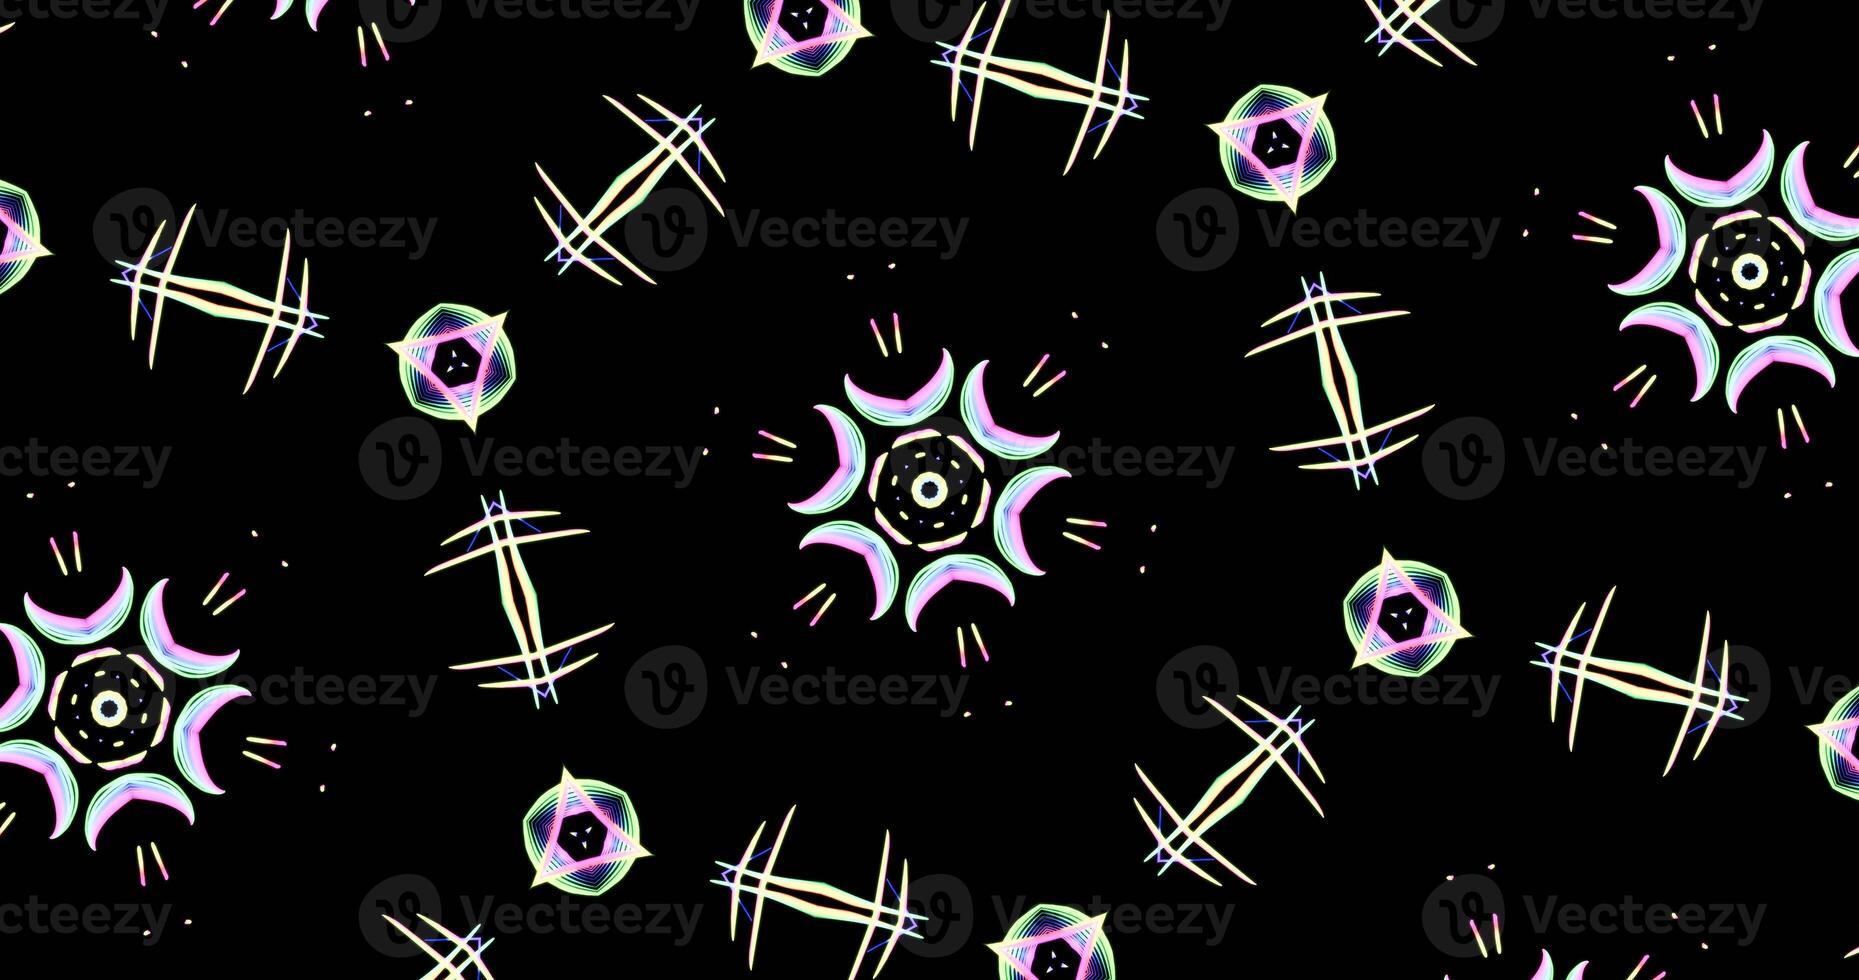 Kaleidoscopic Pattern On Dark Background In Vibrant Colors photo